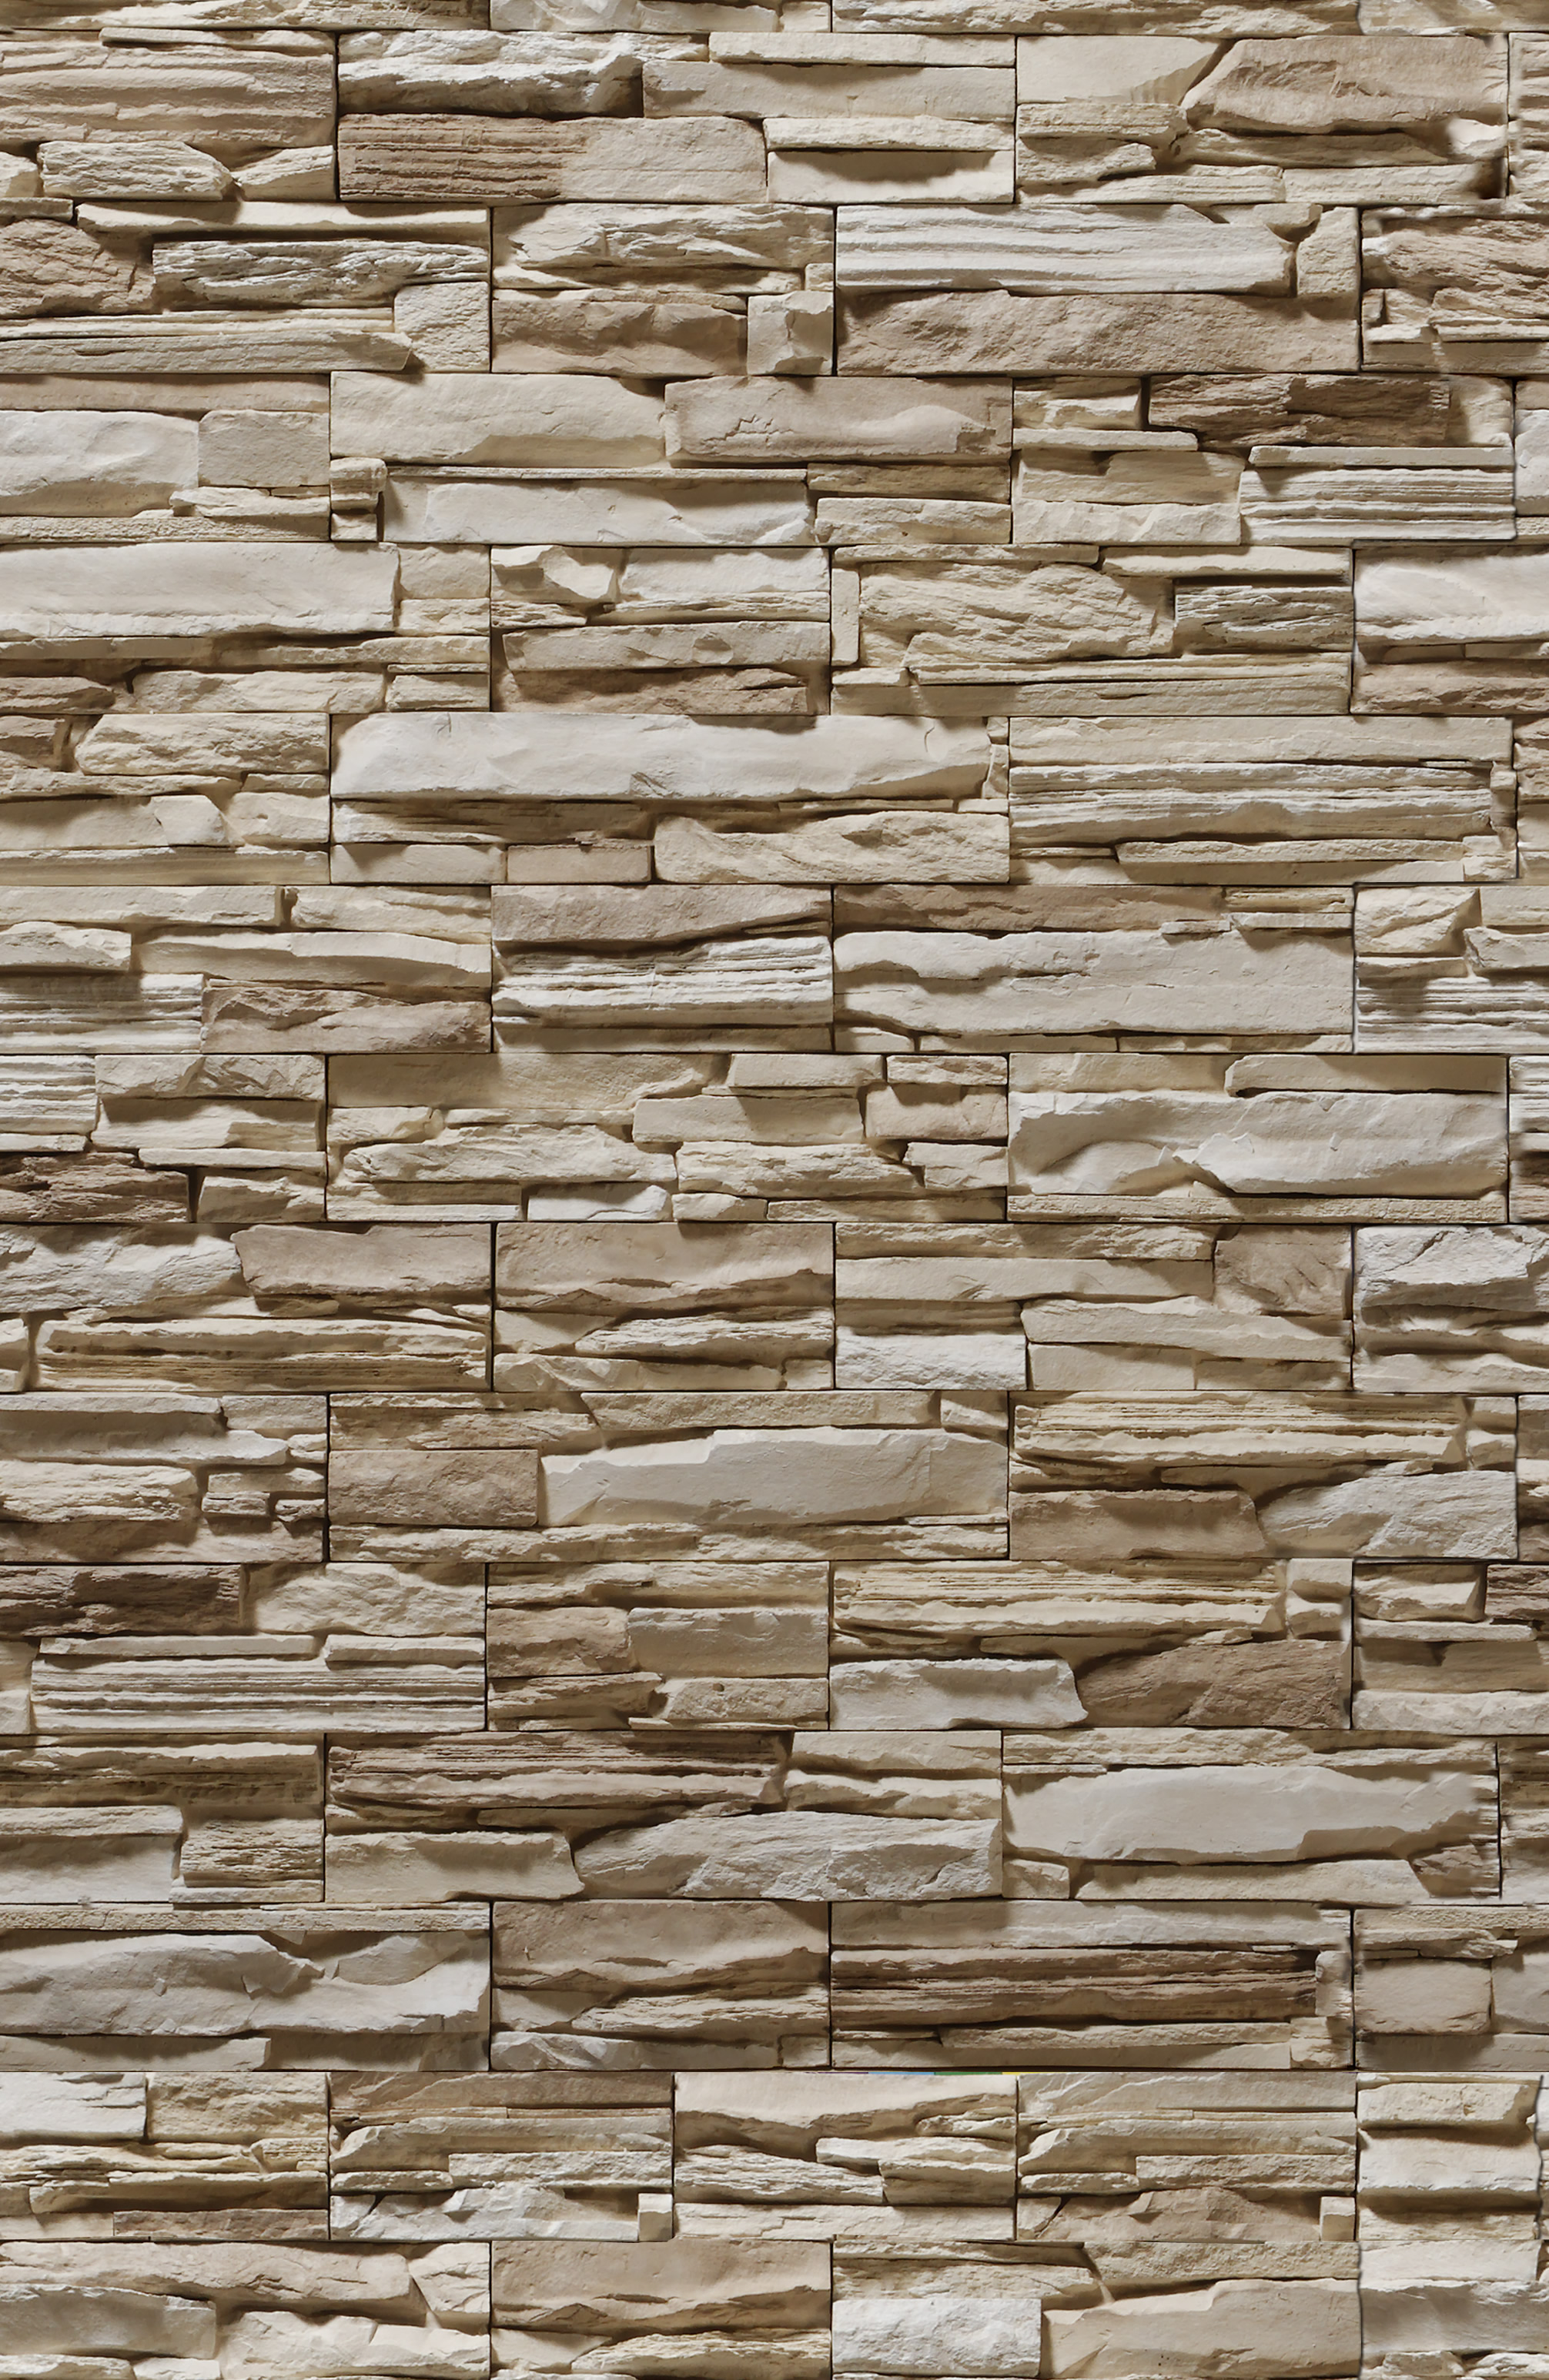  stone, wall, texture stone, stone wall, download background, stone background